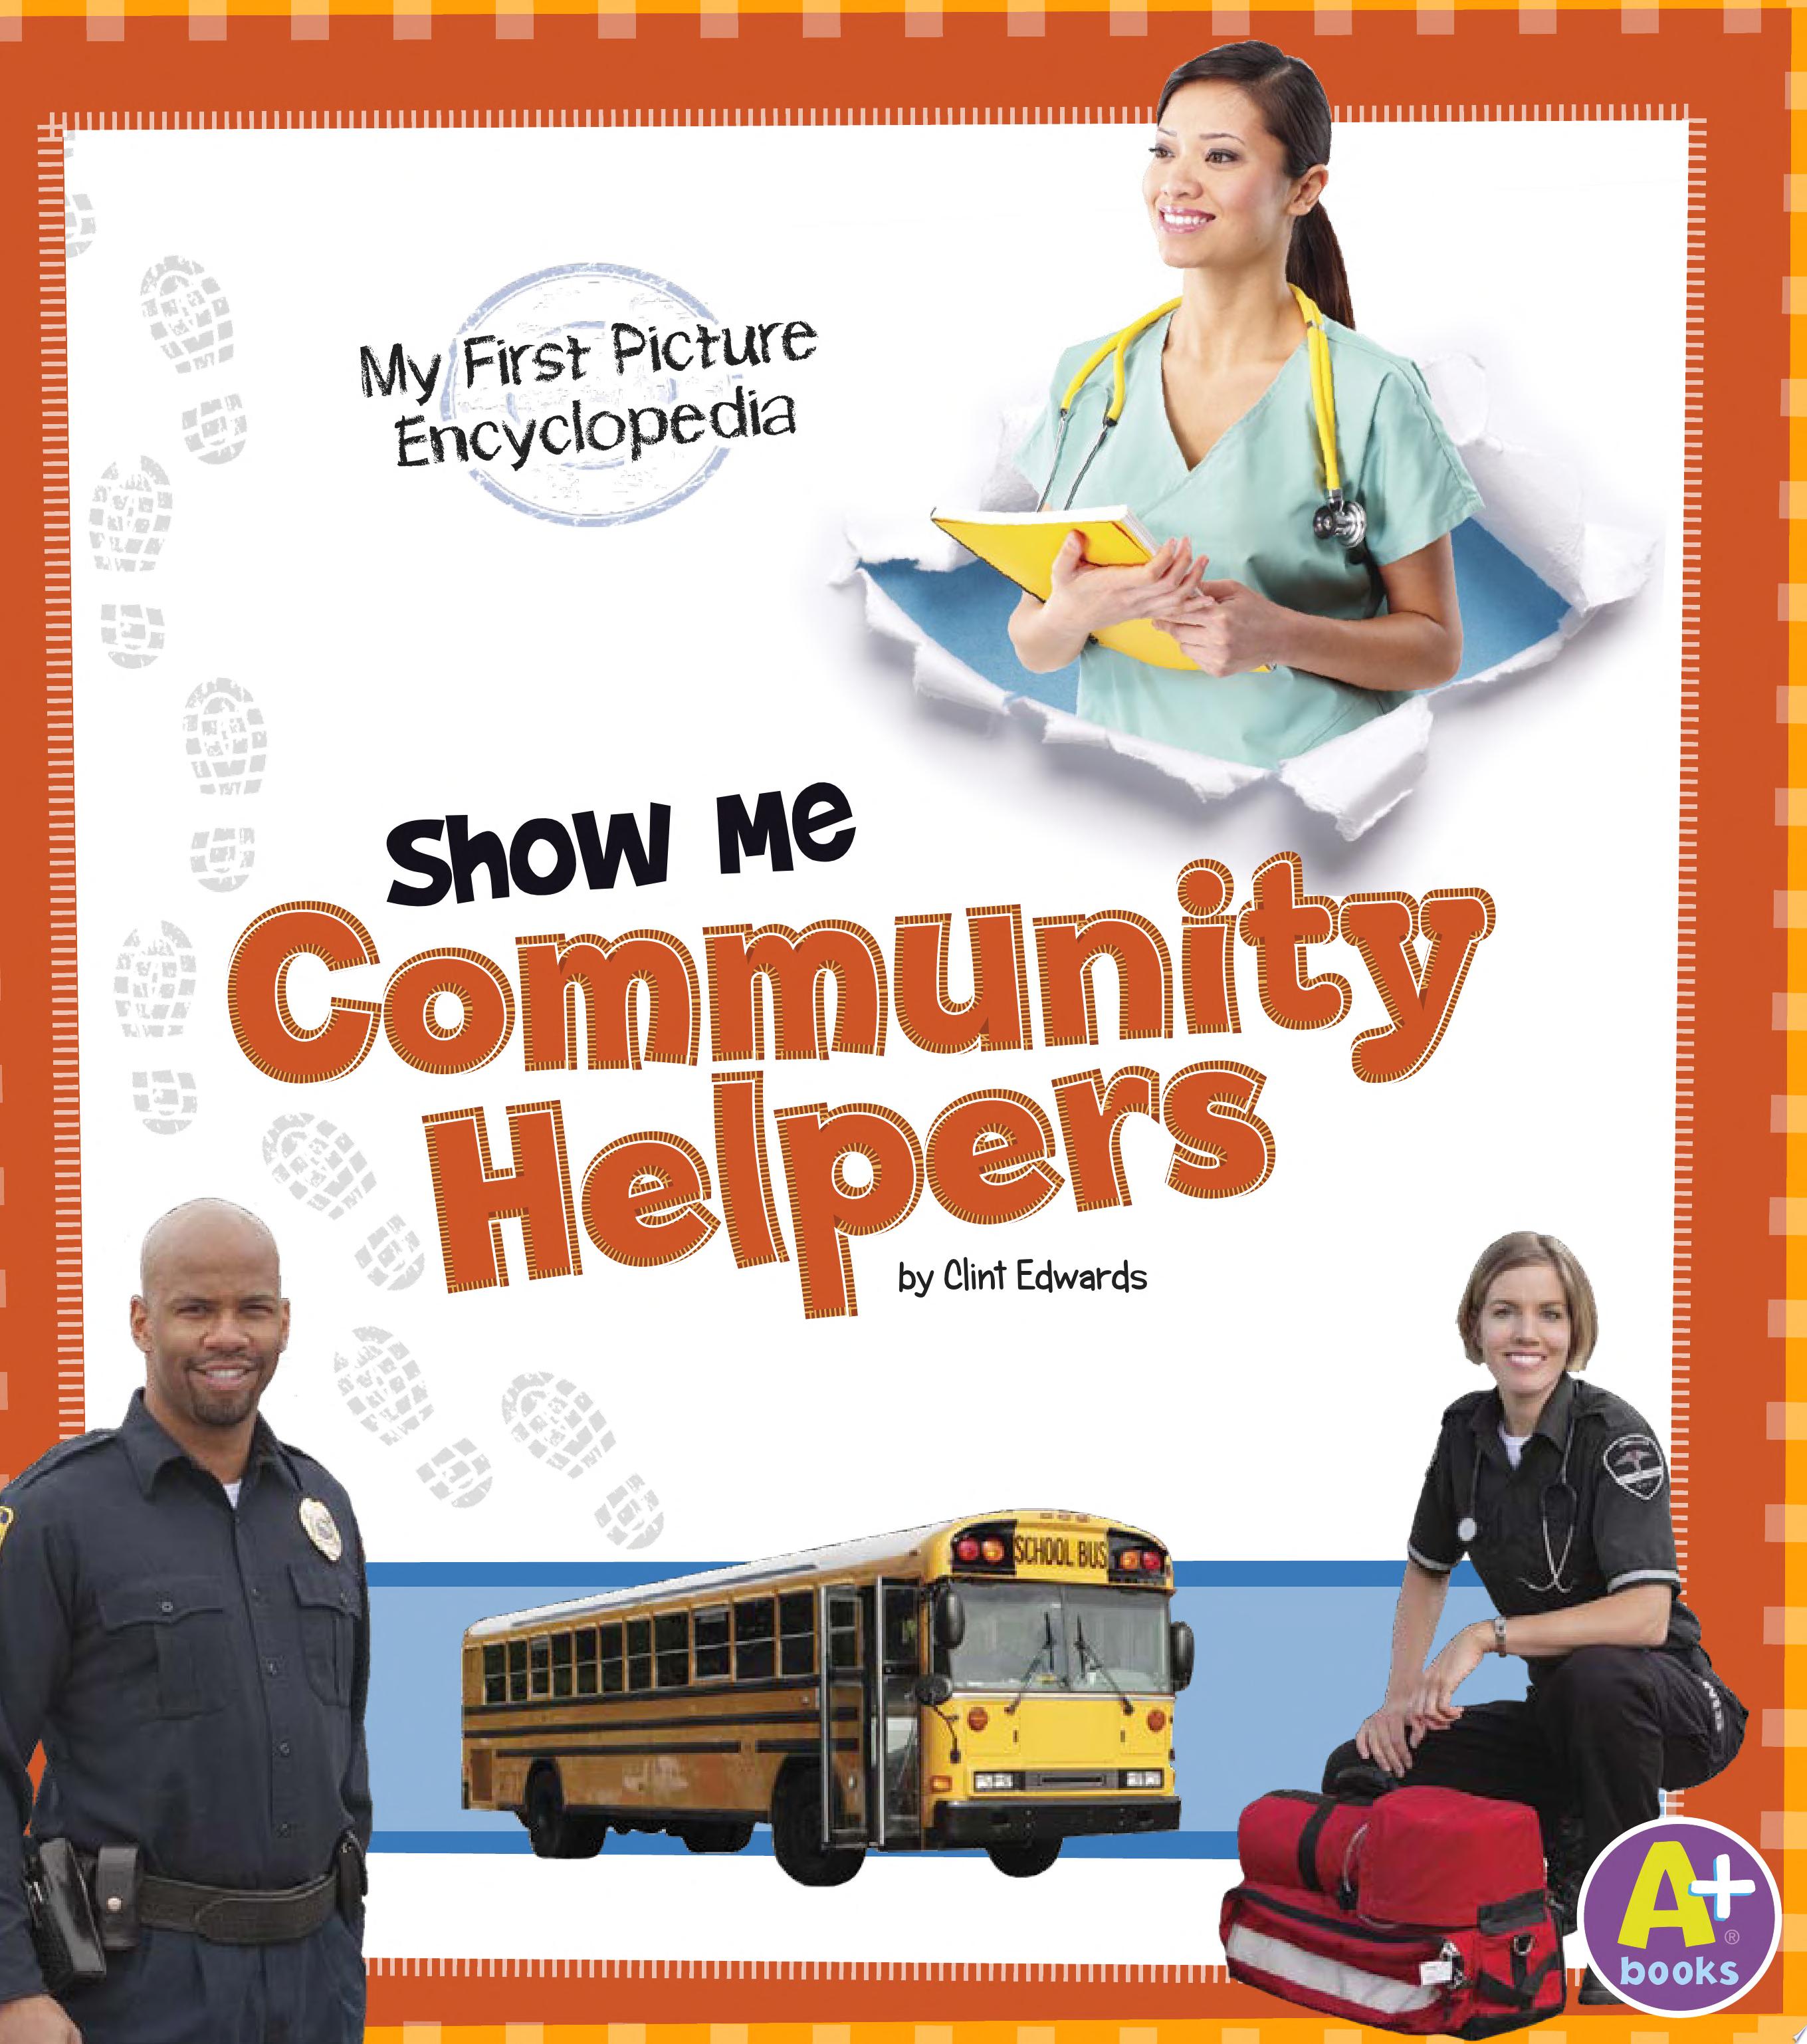 Image for "Show Me Community Helpers"